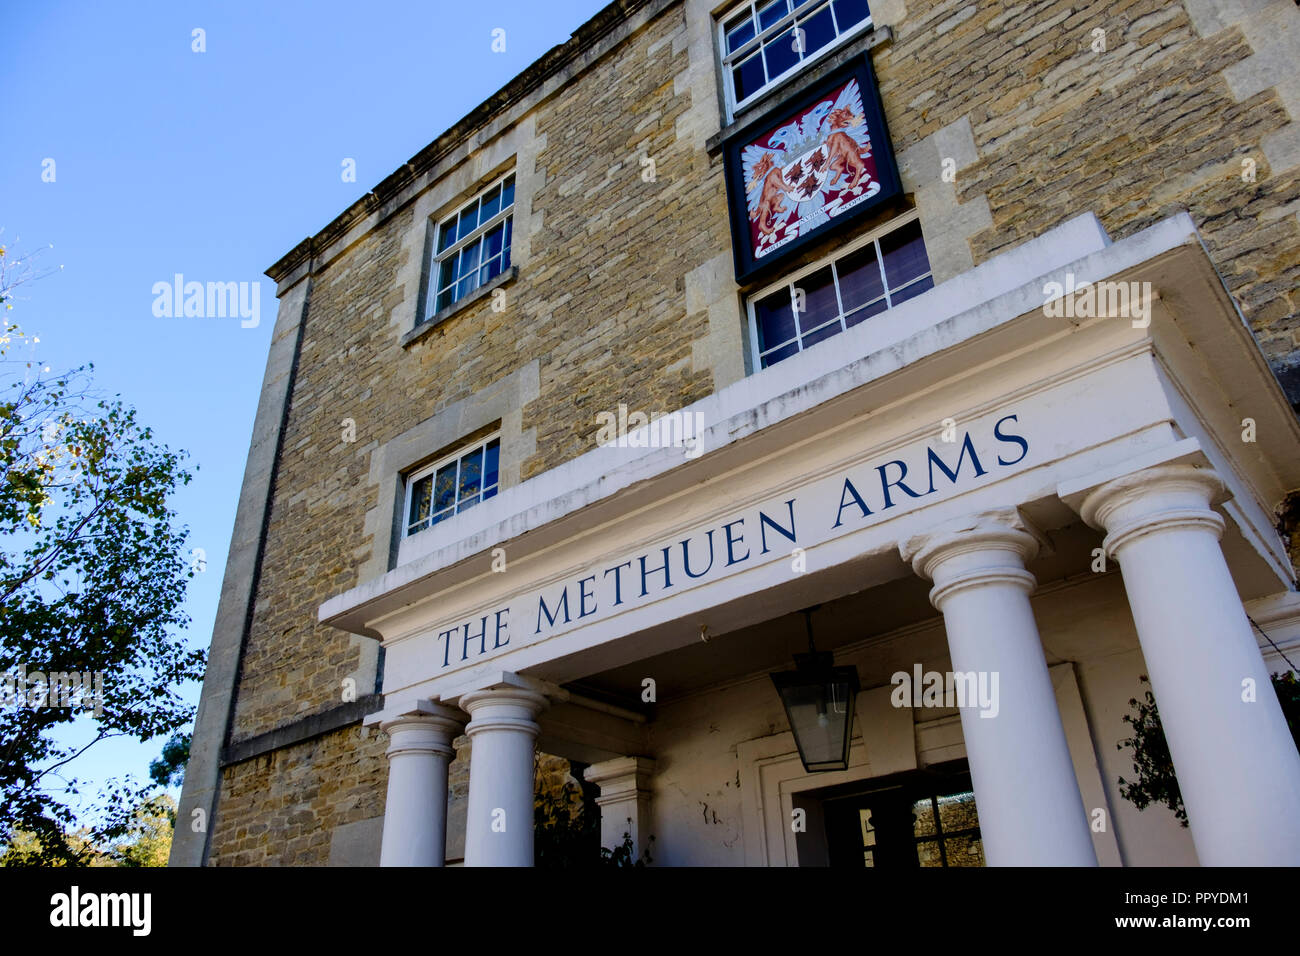 Corsham a small town in wiltshire near chippenham, England UK Methuen arms Stock Photo